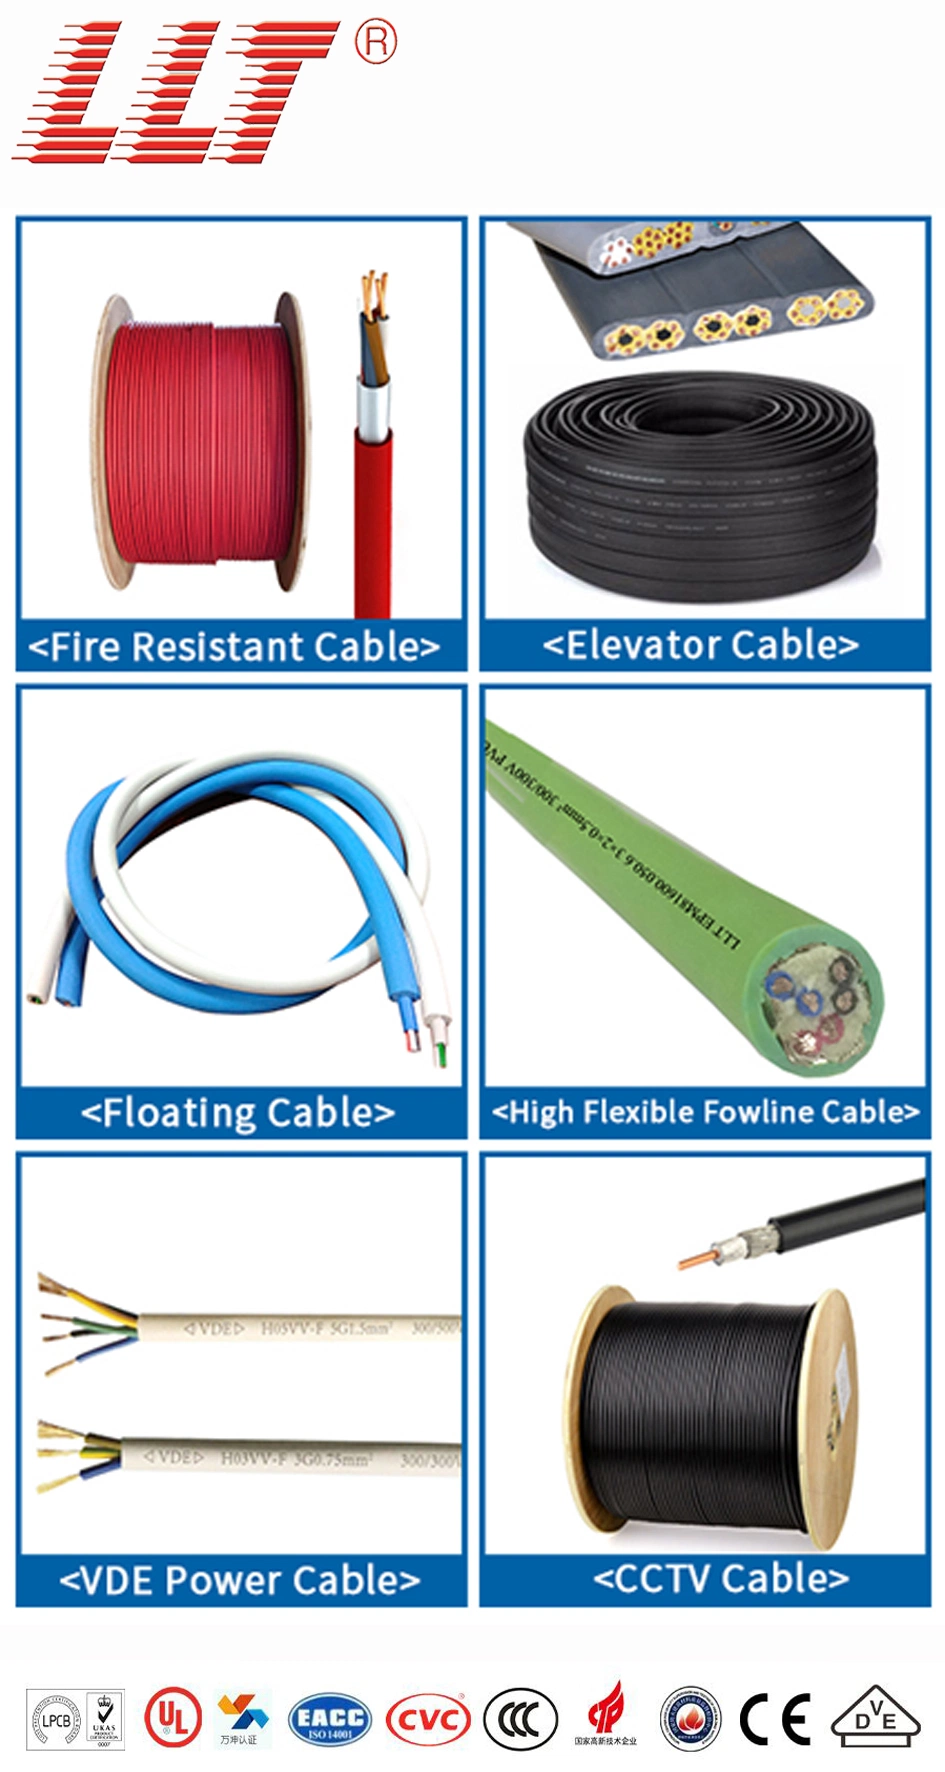 High Flame Retardant Performance Lpcb Fire Resistant Cable for Fire Detection and Fire Alarm